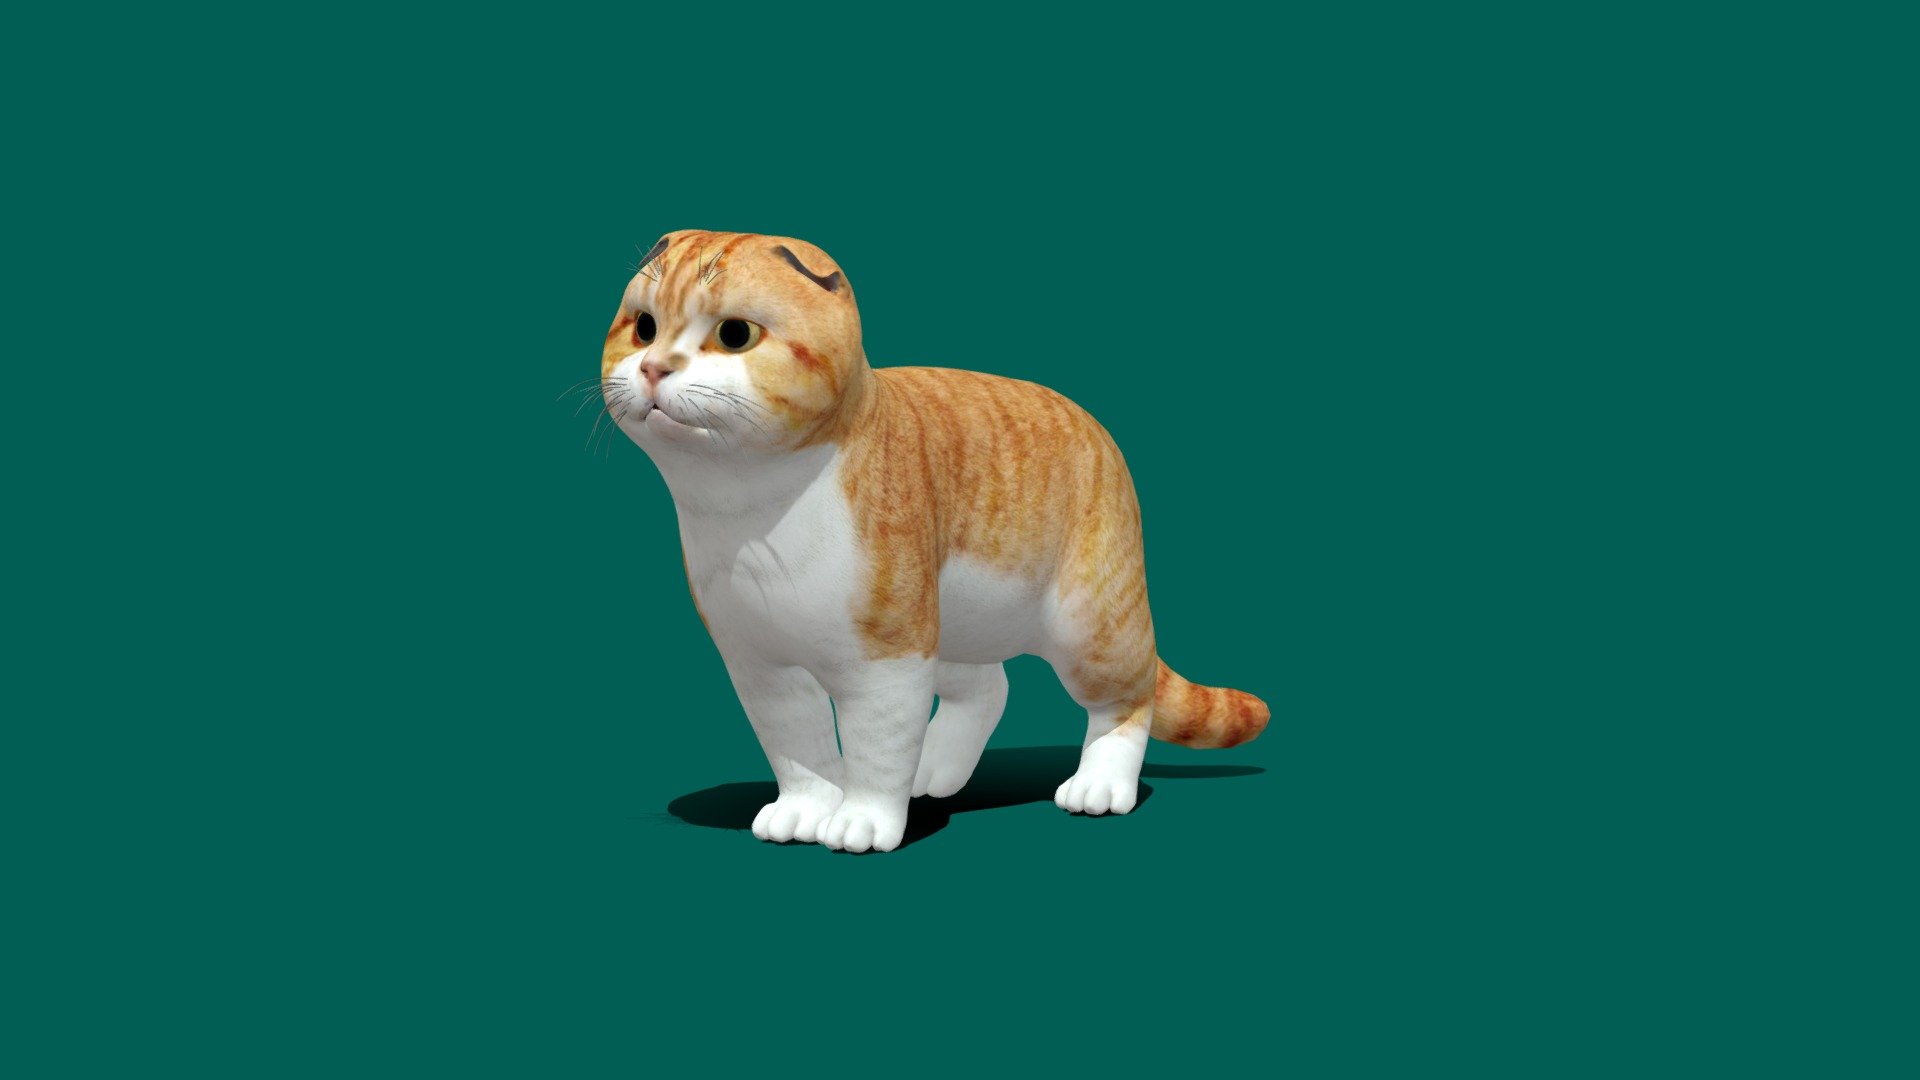 3D Animated Orange Scottish Fold Model.
4K PBR Textures Material.

The Scottish Fold is a breed of domestic cat with a natural dominant gene mutation that affects cartilage throughout the body, causing the ears to &ldquo;fold